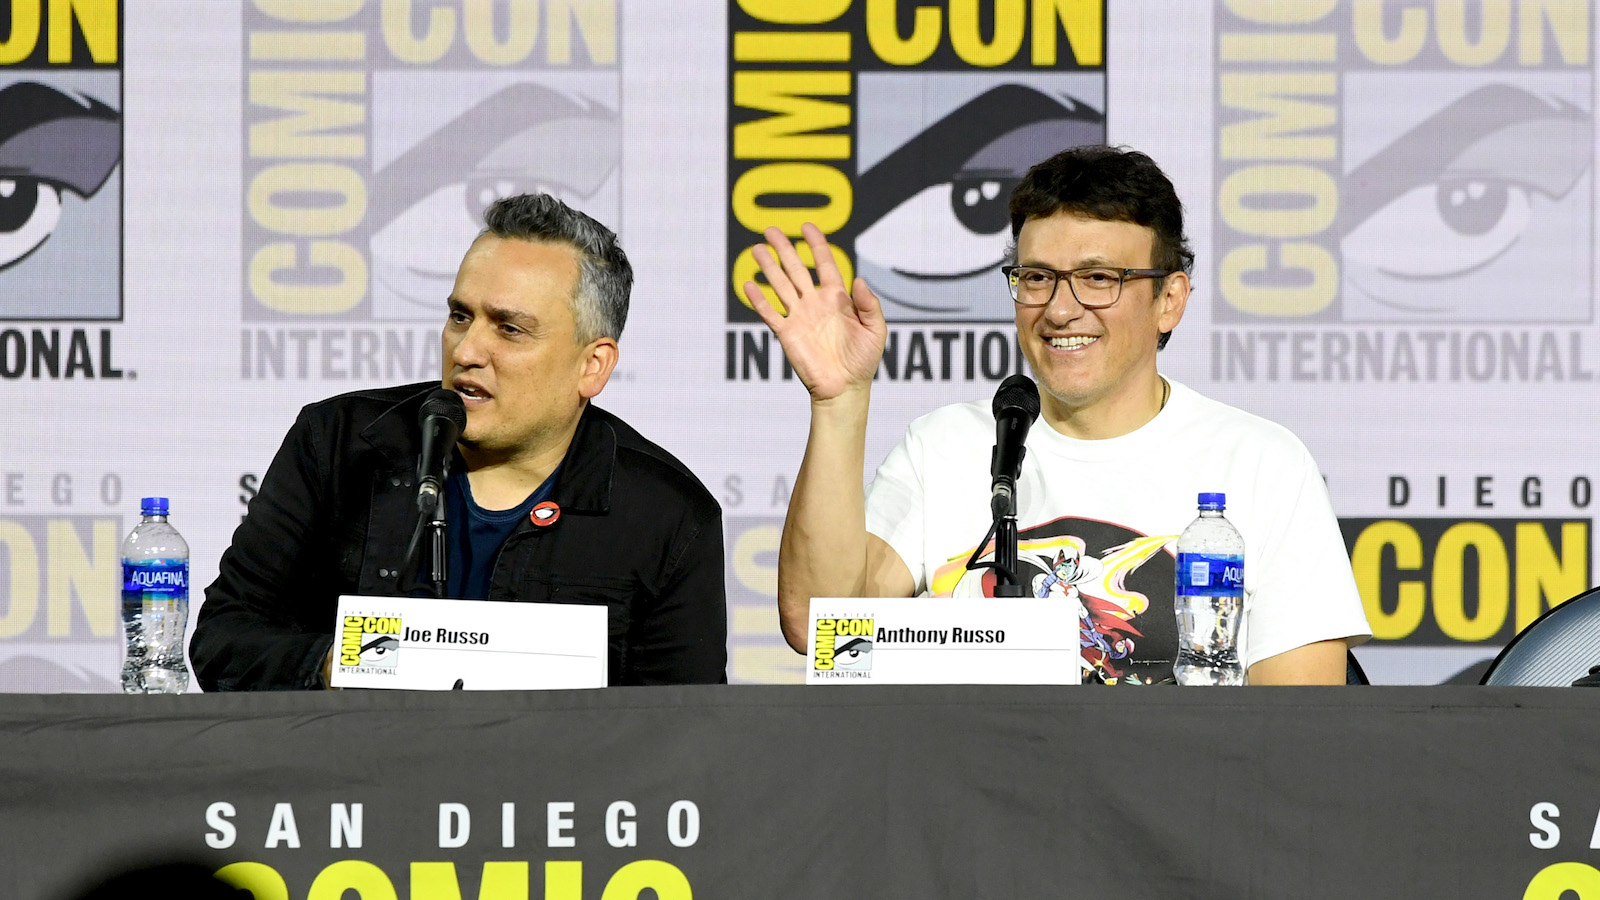 The Russo brothers’ sci-fi ‘The Electric State’ starts shooting in October